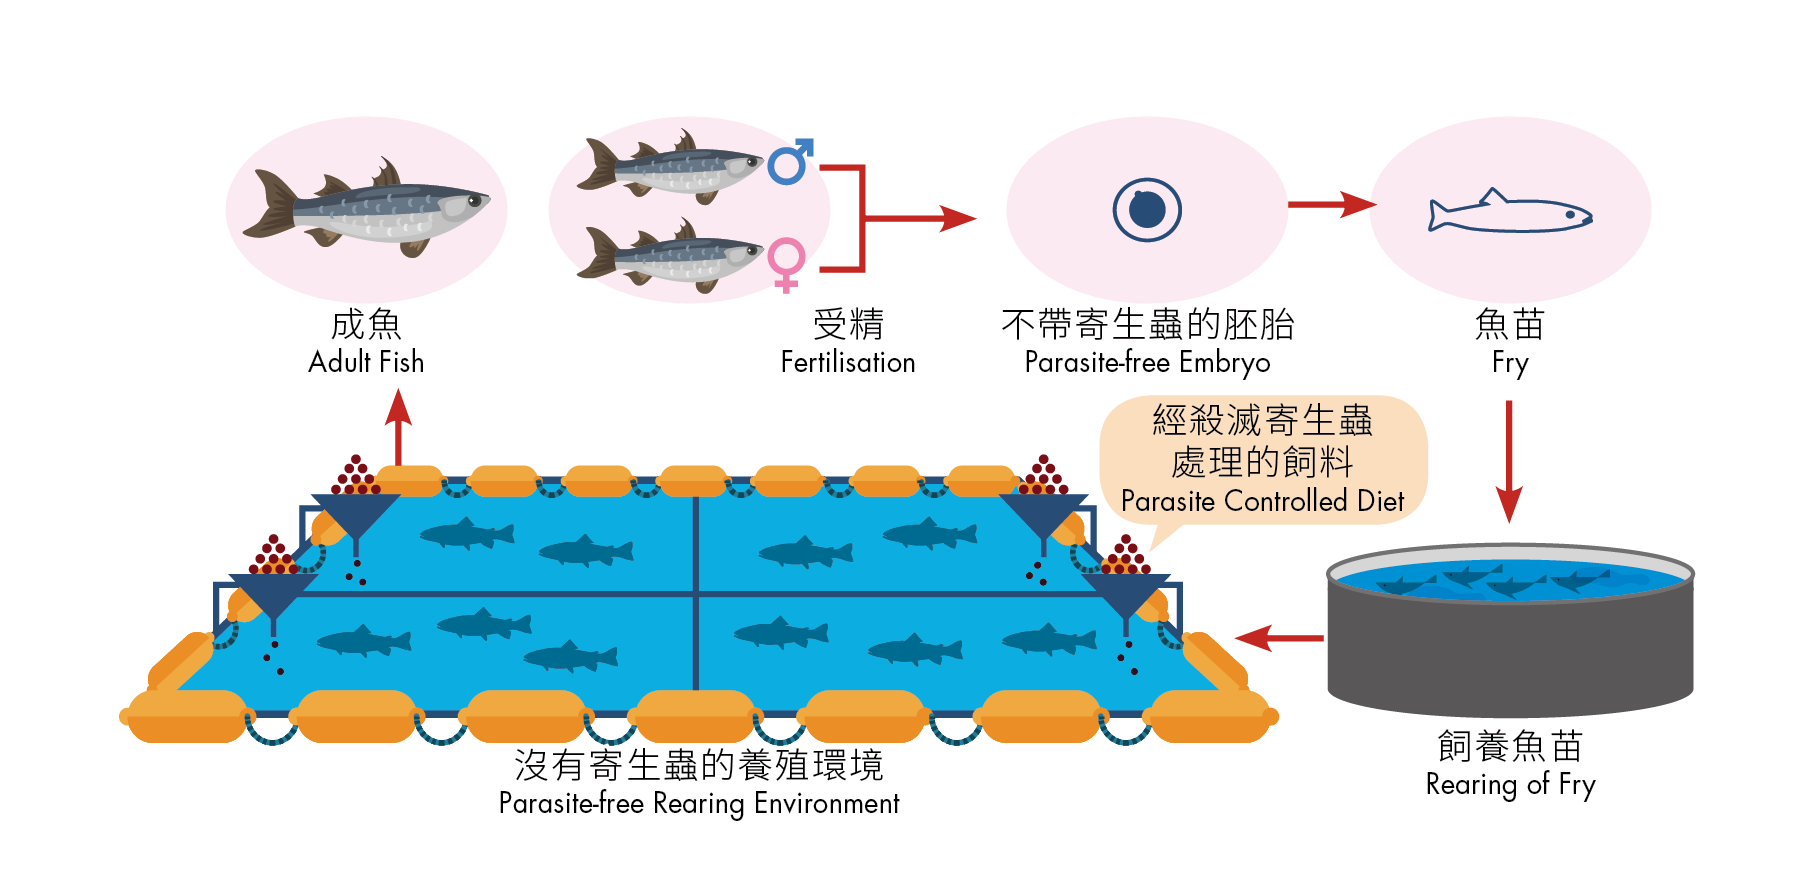 Good aquaculture practice can reduce the risk of parasite infestation.